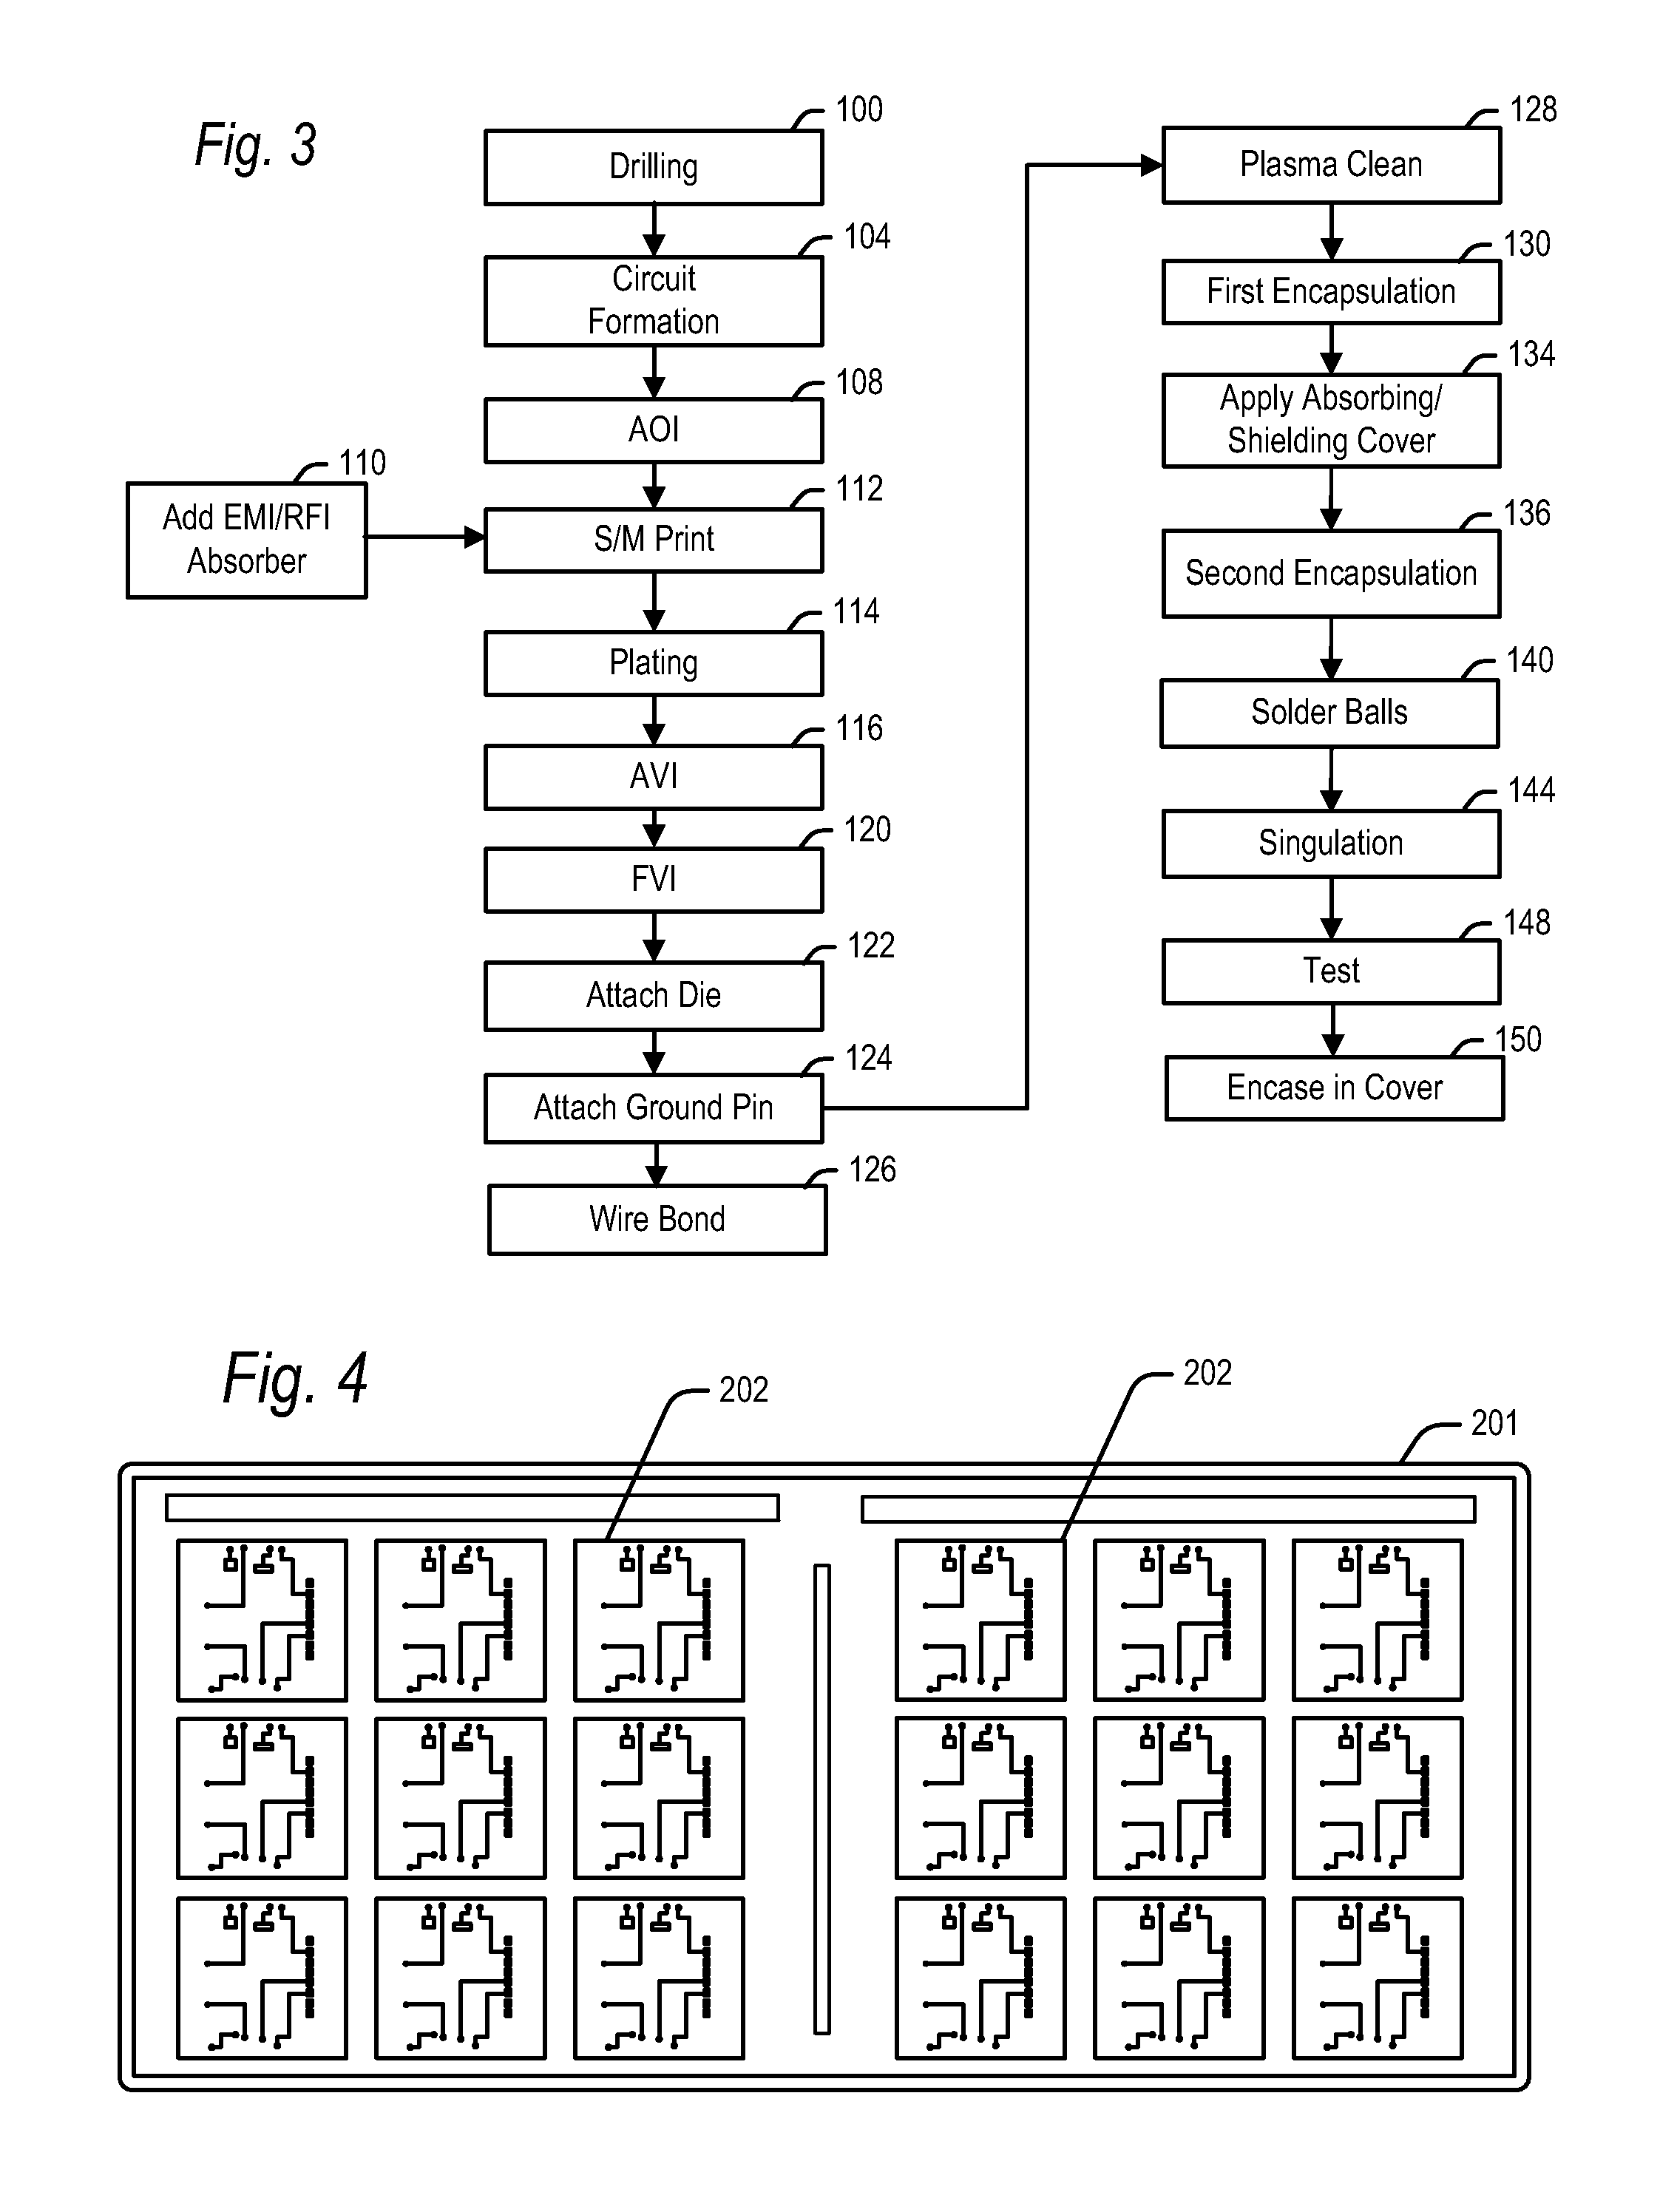 Semiconductor device including electromagnetic absorption and shielding